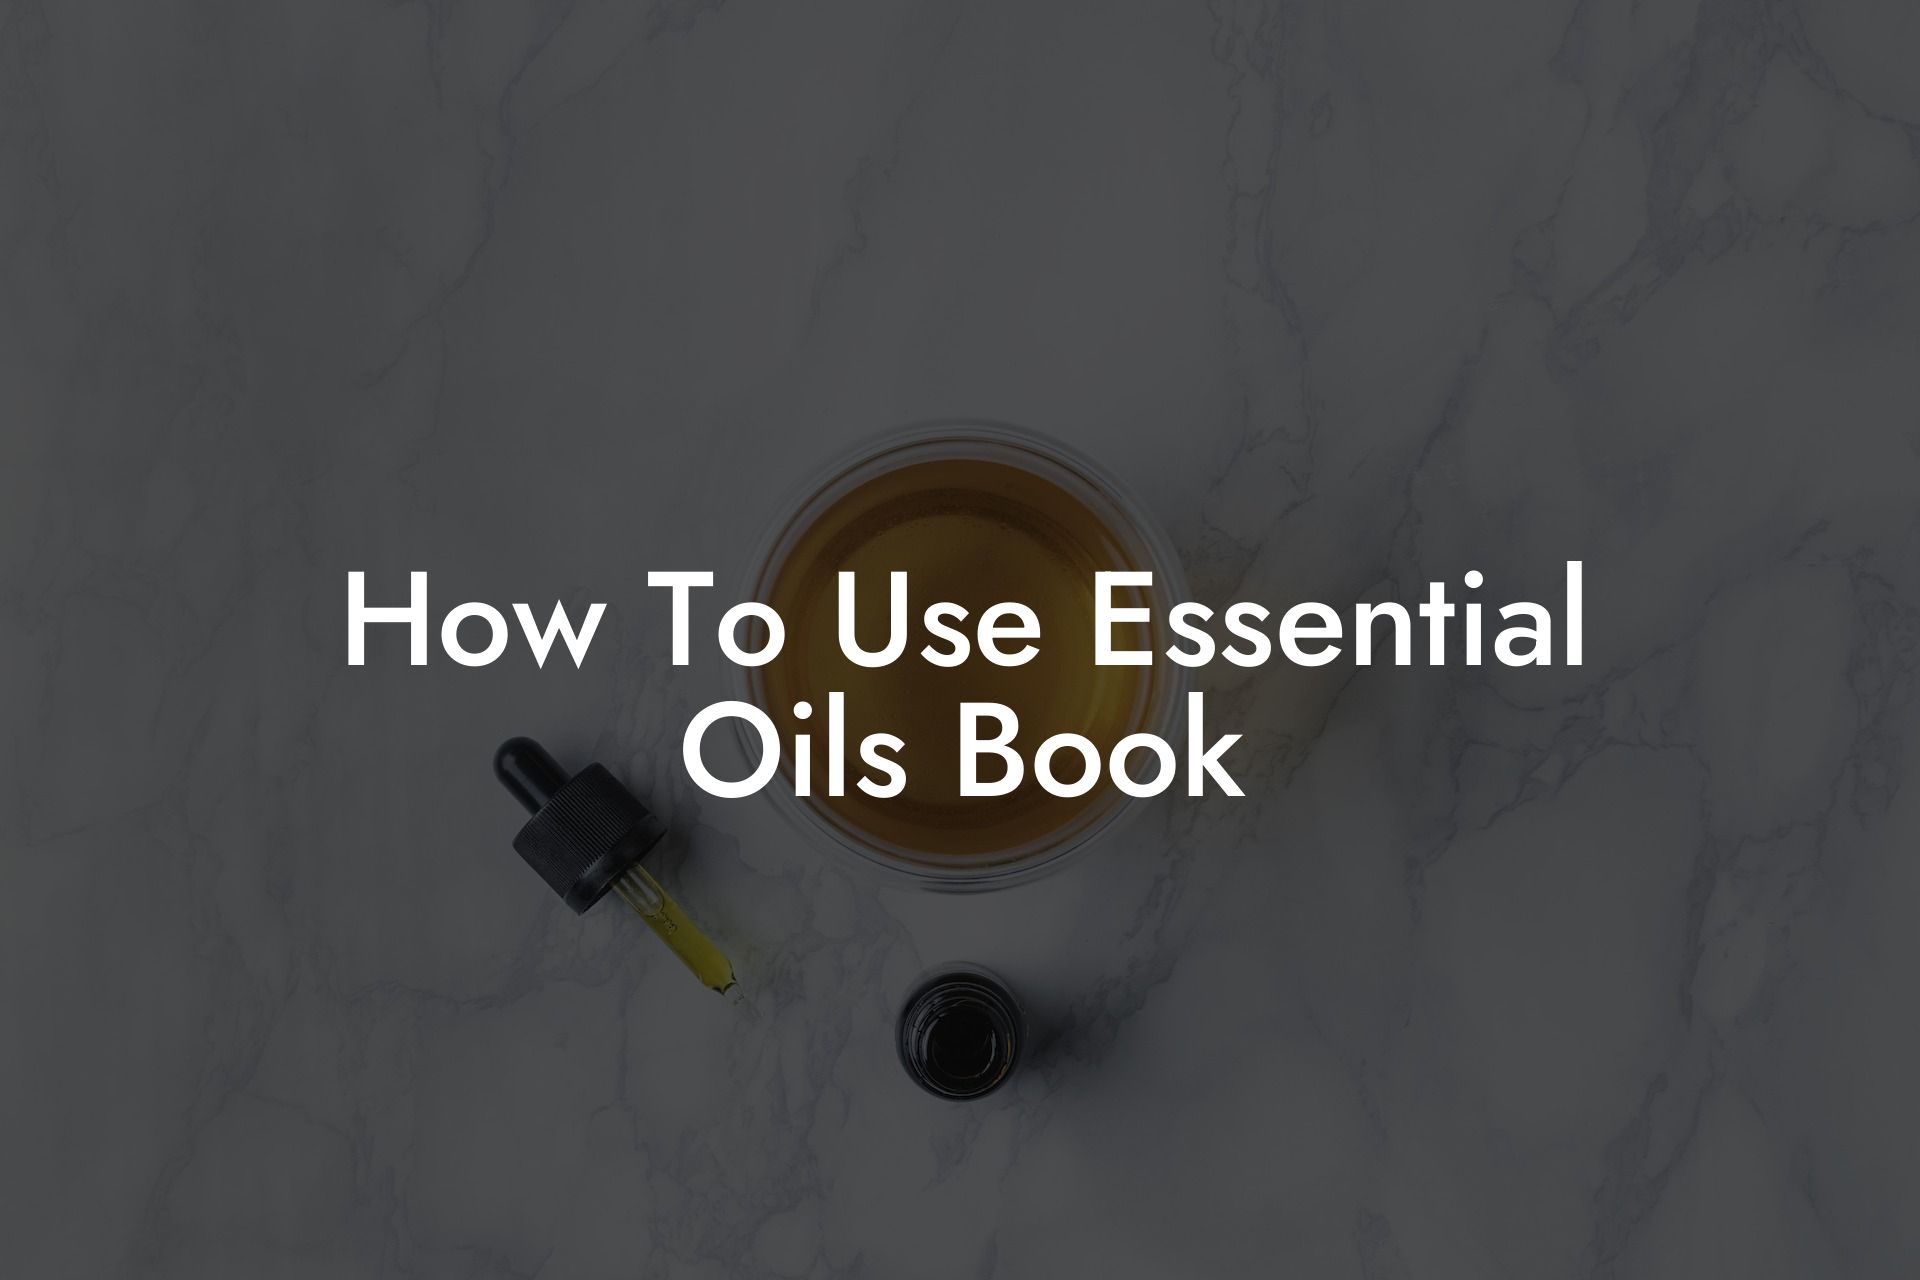 How To Use Essential Oils Book